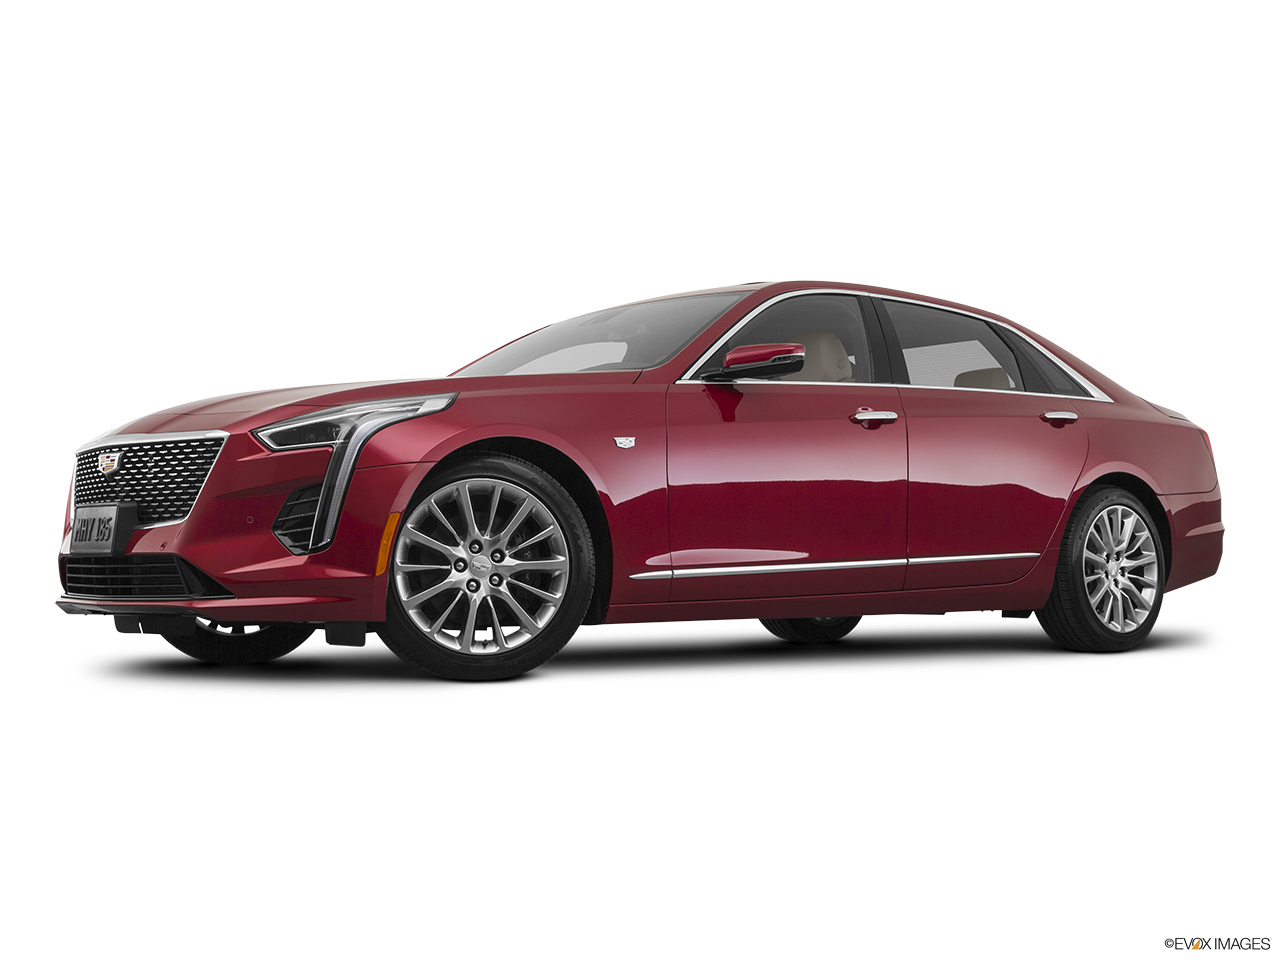 2020 Cadillac CT6 Luxury Low/wide front 5/8. 